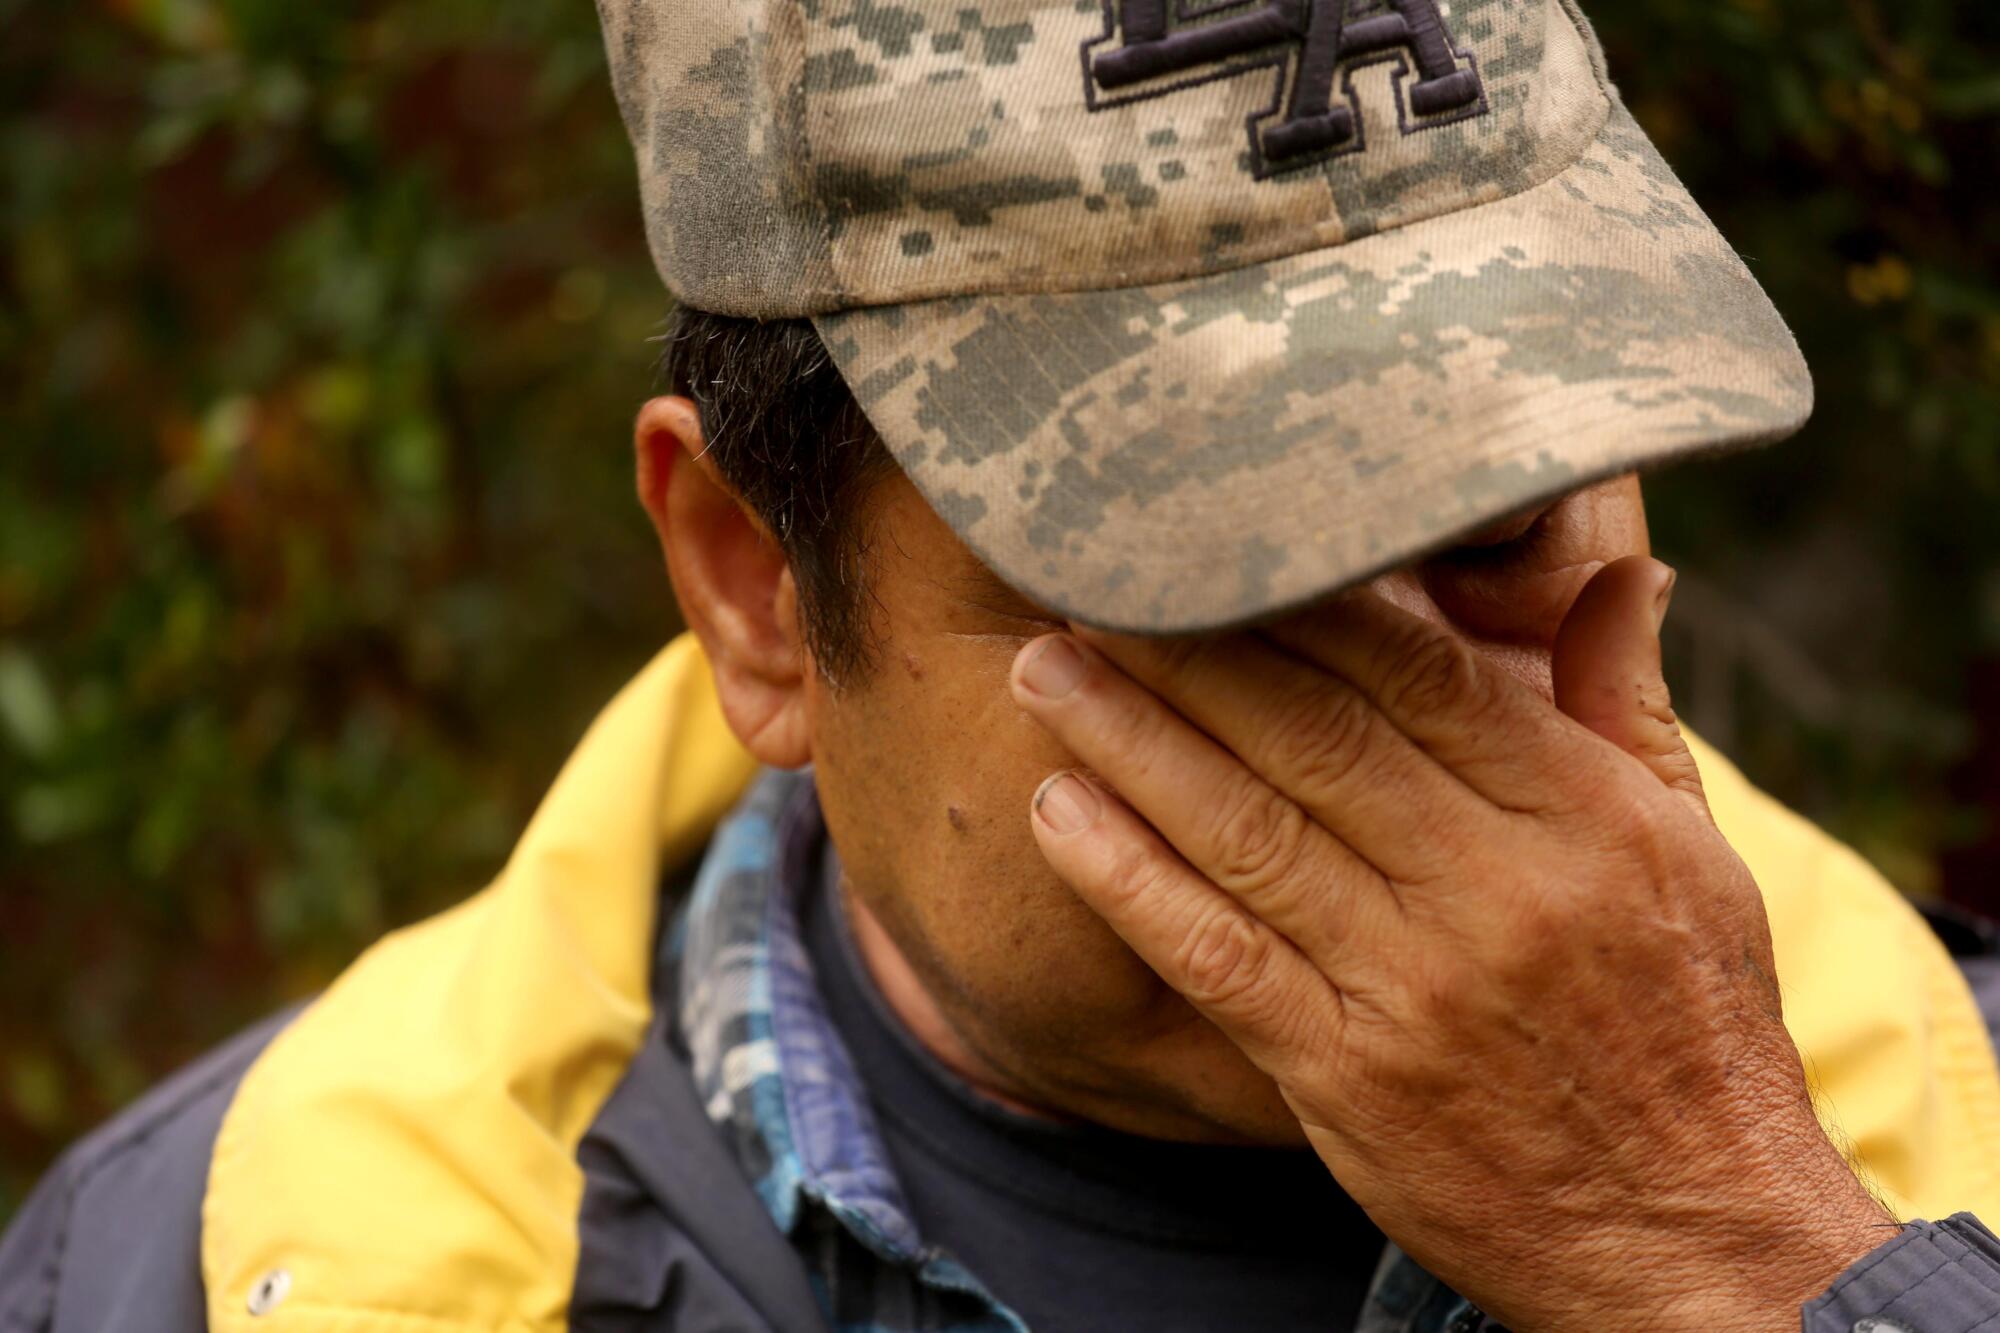 A man covers his face with his hand as he cries.